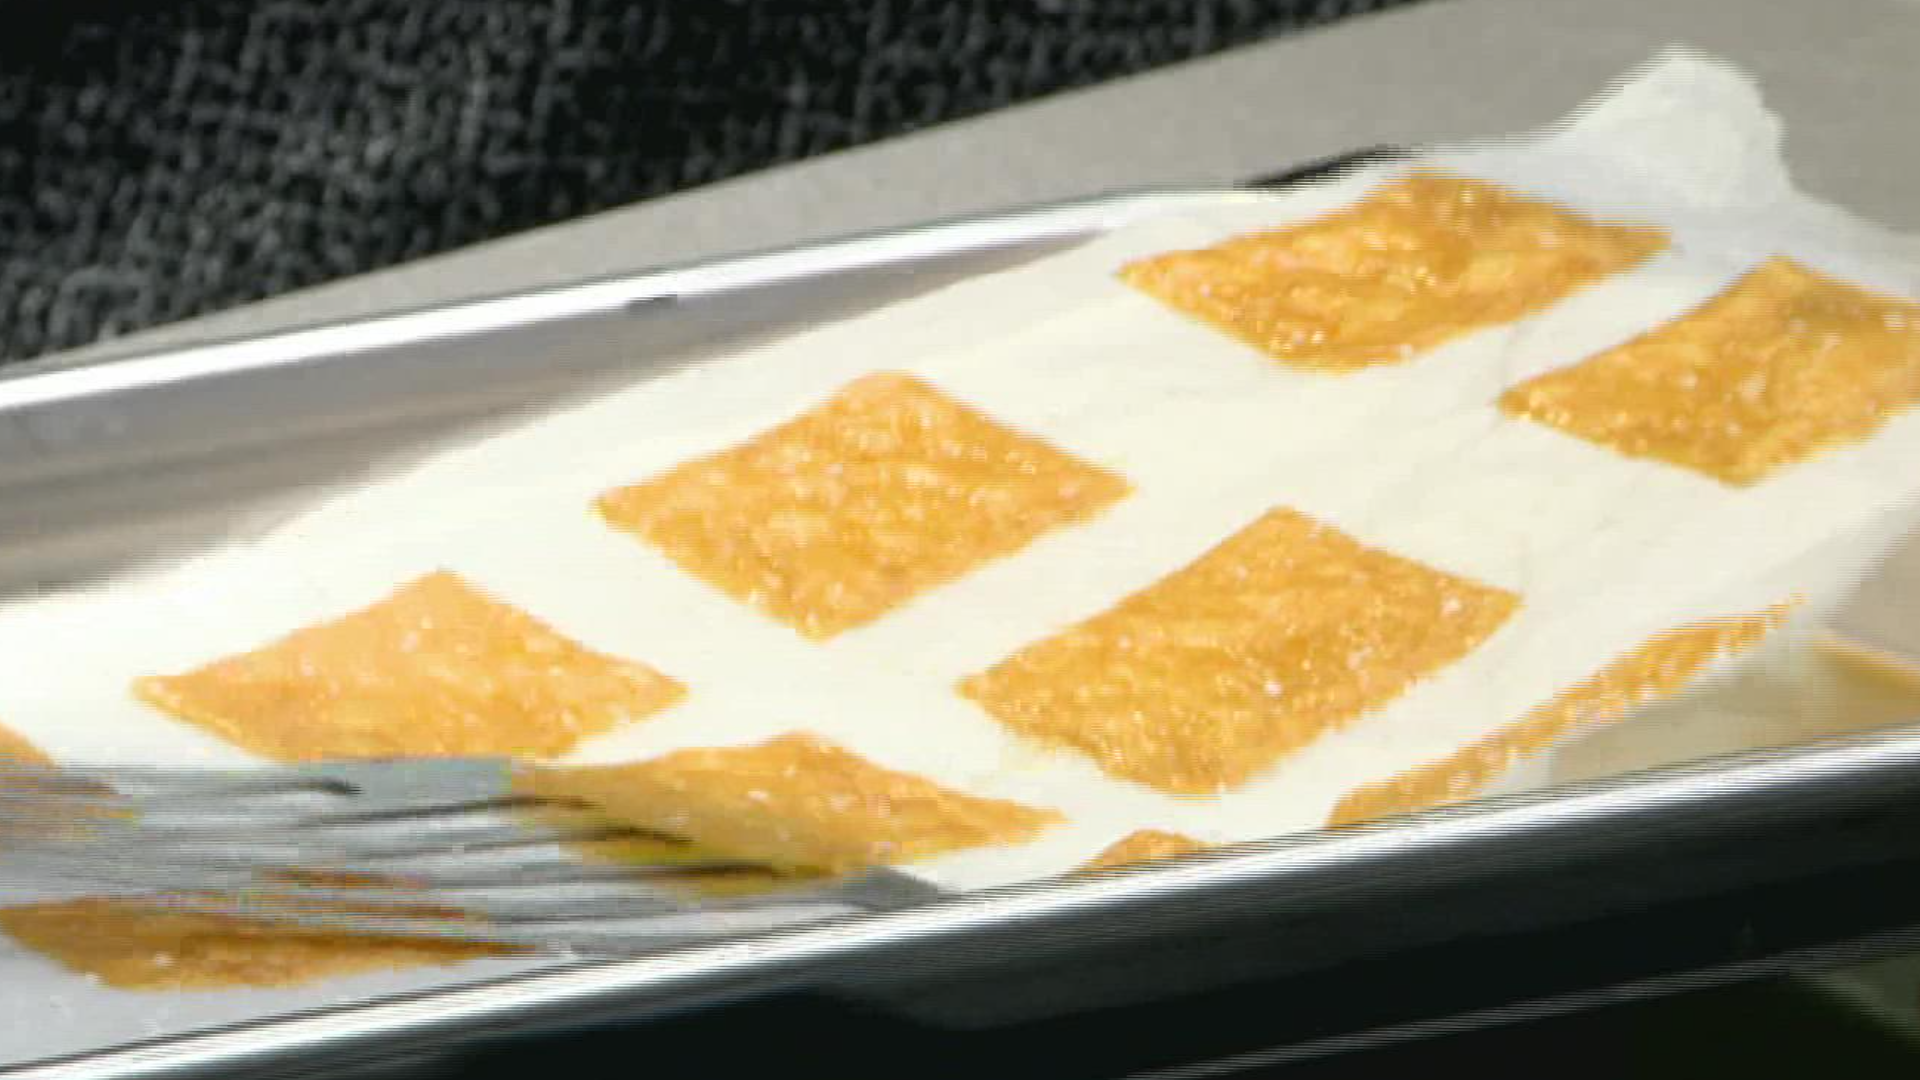 Jackie DeTore and Danielle Miller celebrate National Cheese Day by trying a viral TikTok recipe: homemade Cheez-Its.